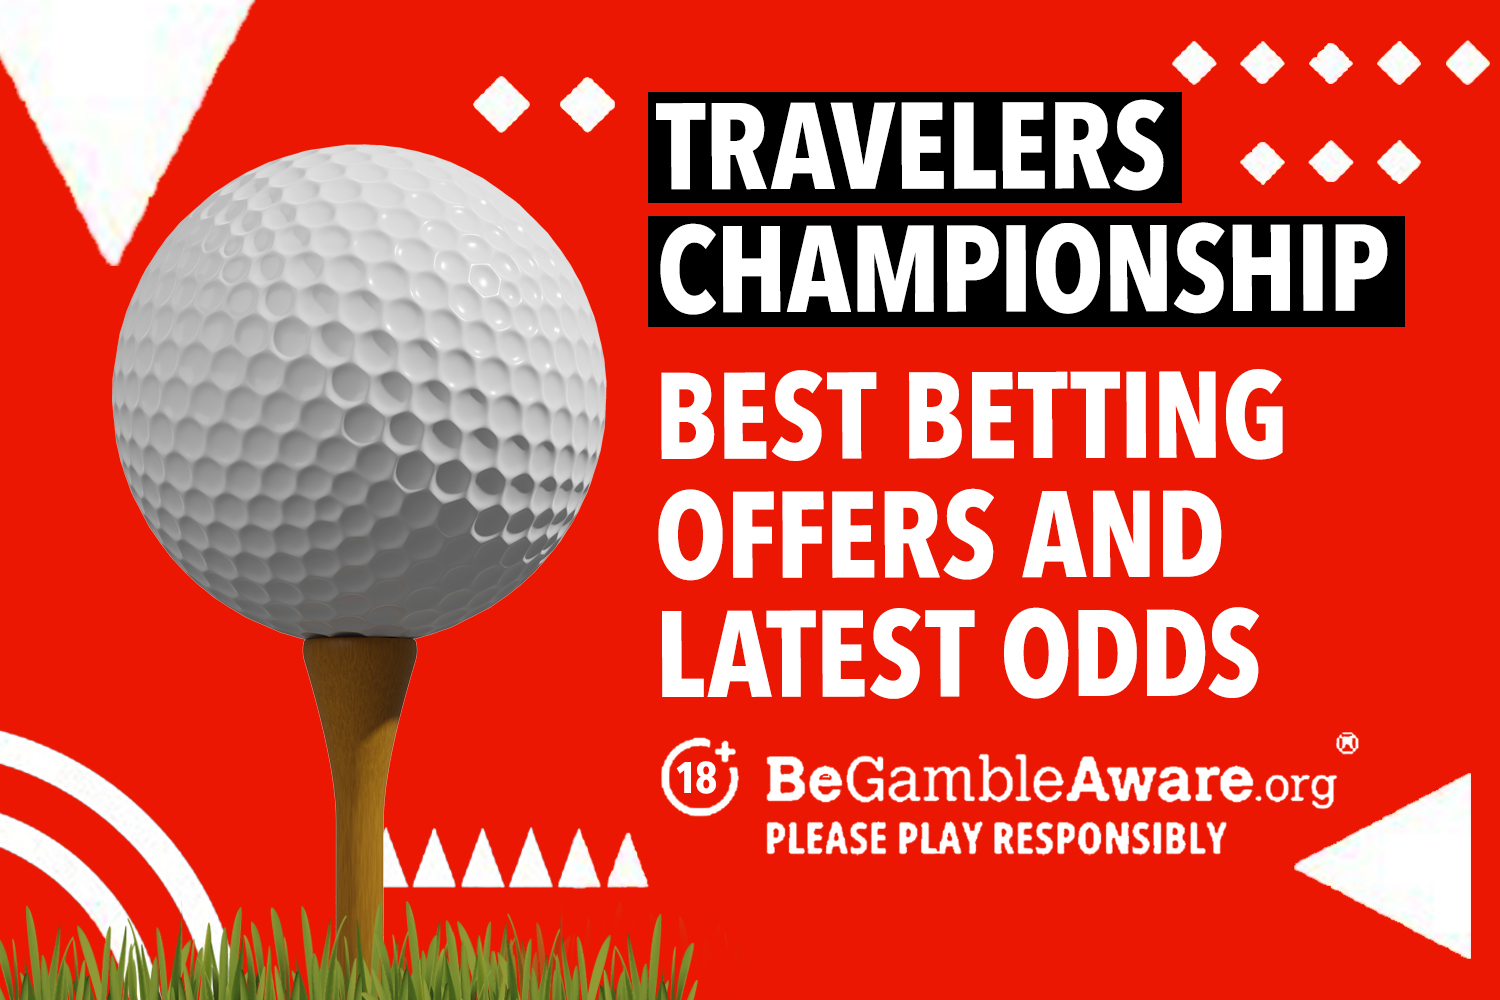 Photo: open golf betting offers